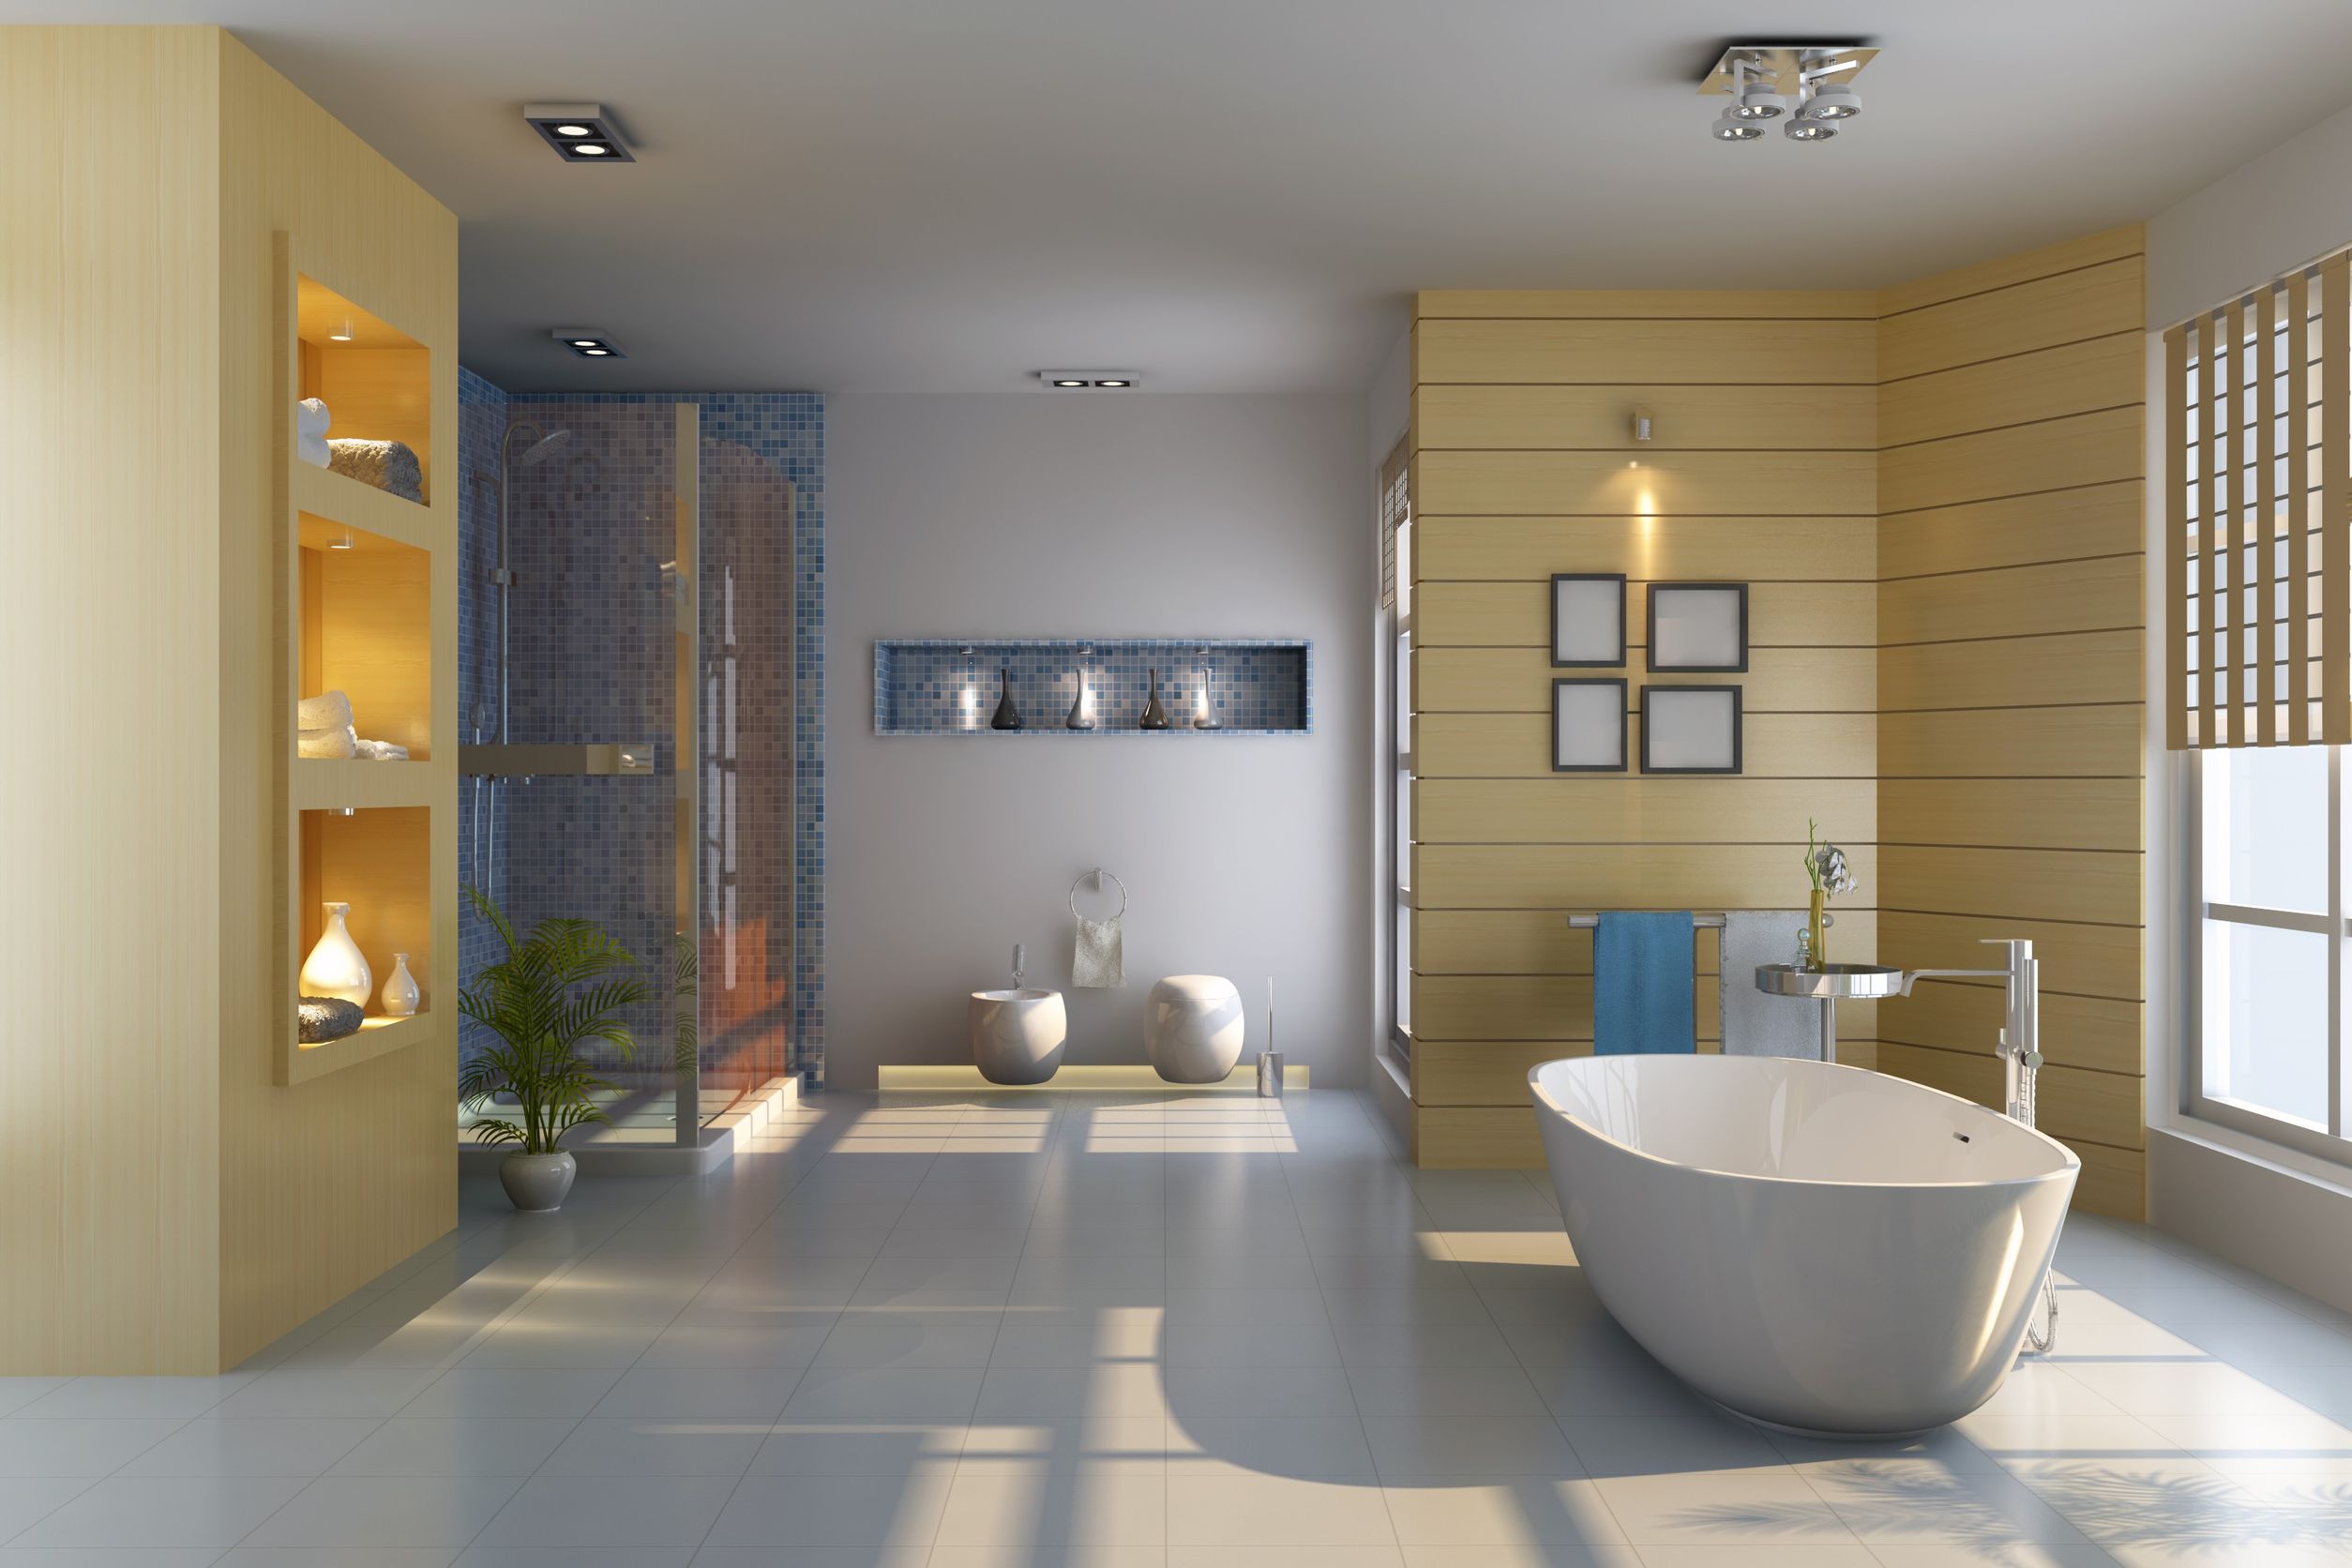 Why Hire Bathroom Renovation Specialists?